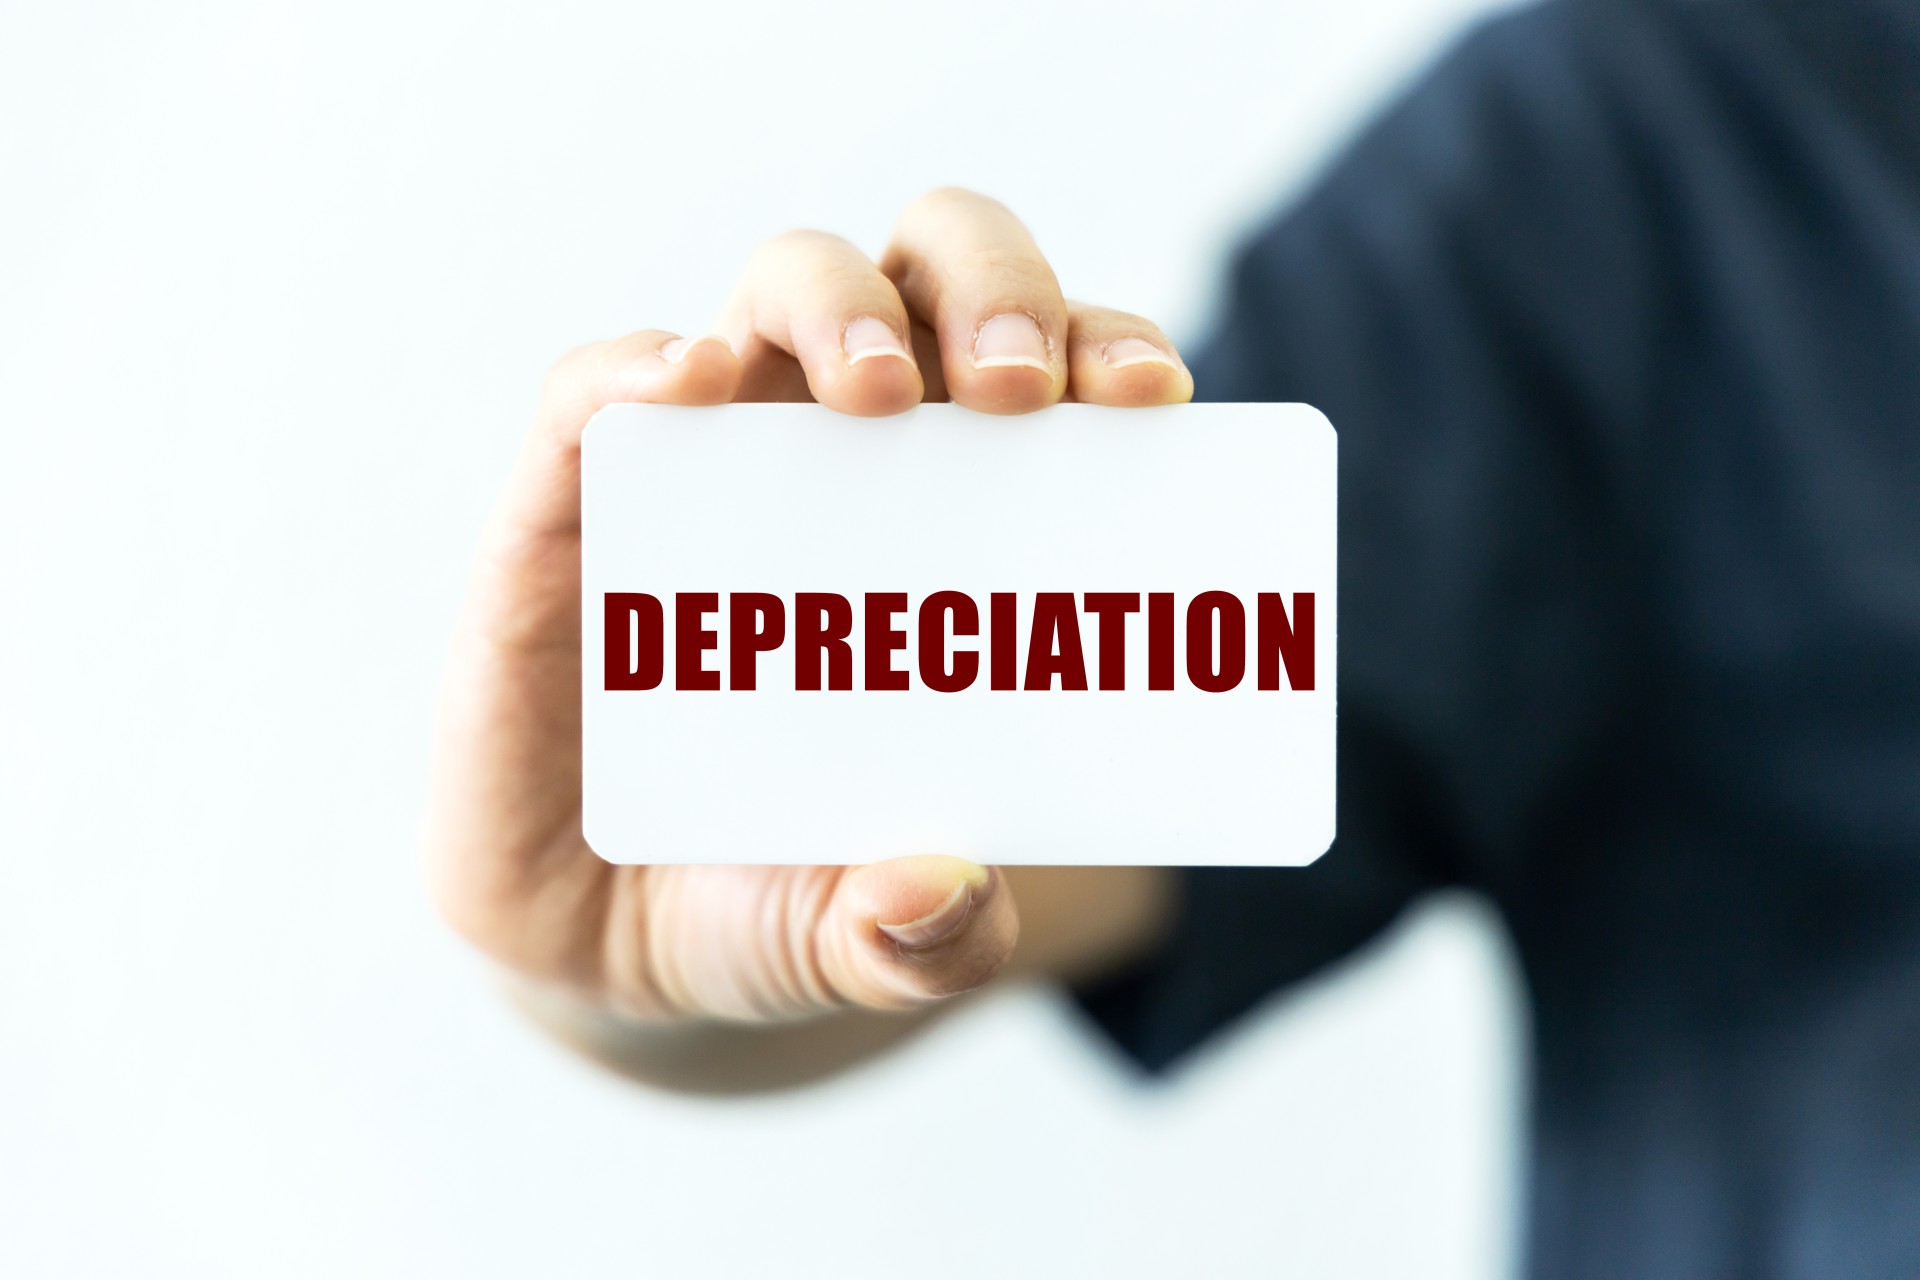 Depreciation text on blank business card being held by a woman's hand with blurred background. Business concept about Depreciation.